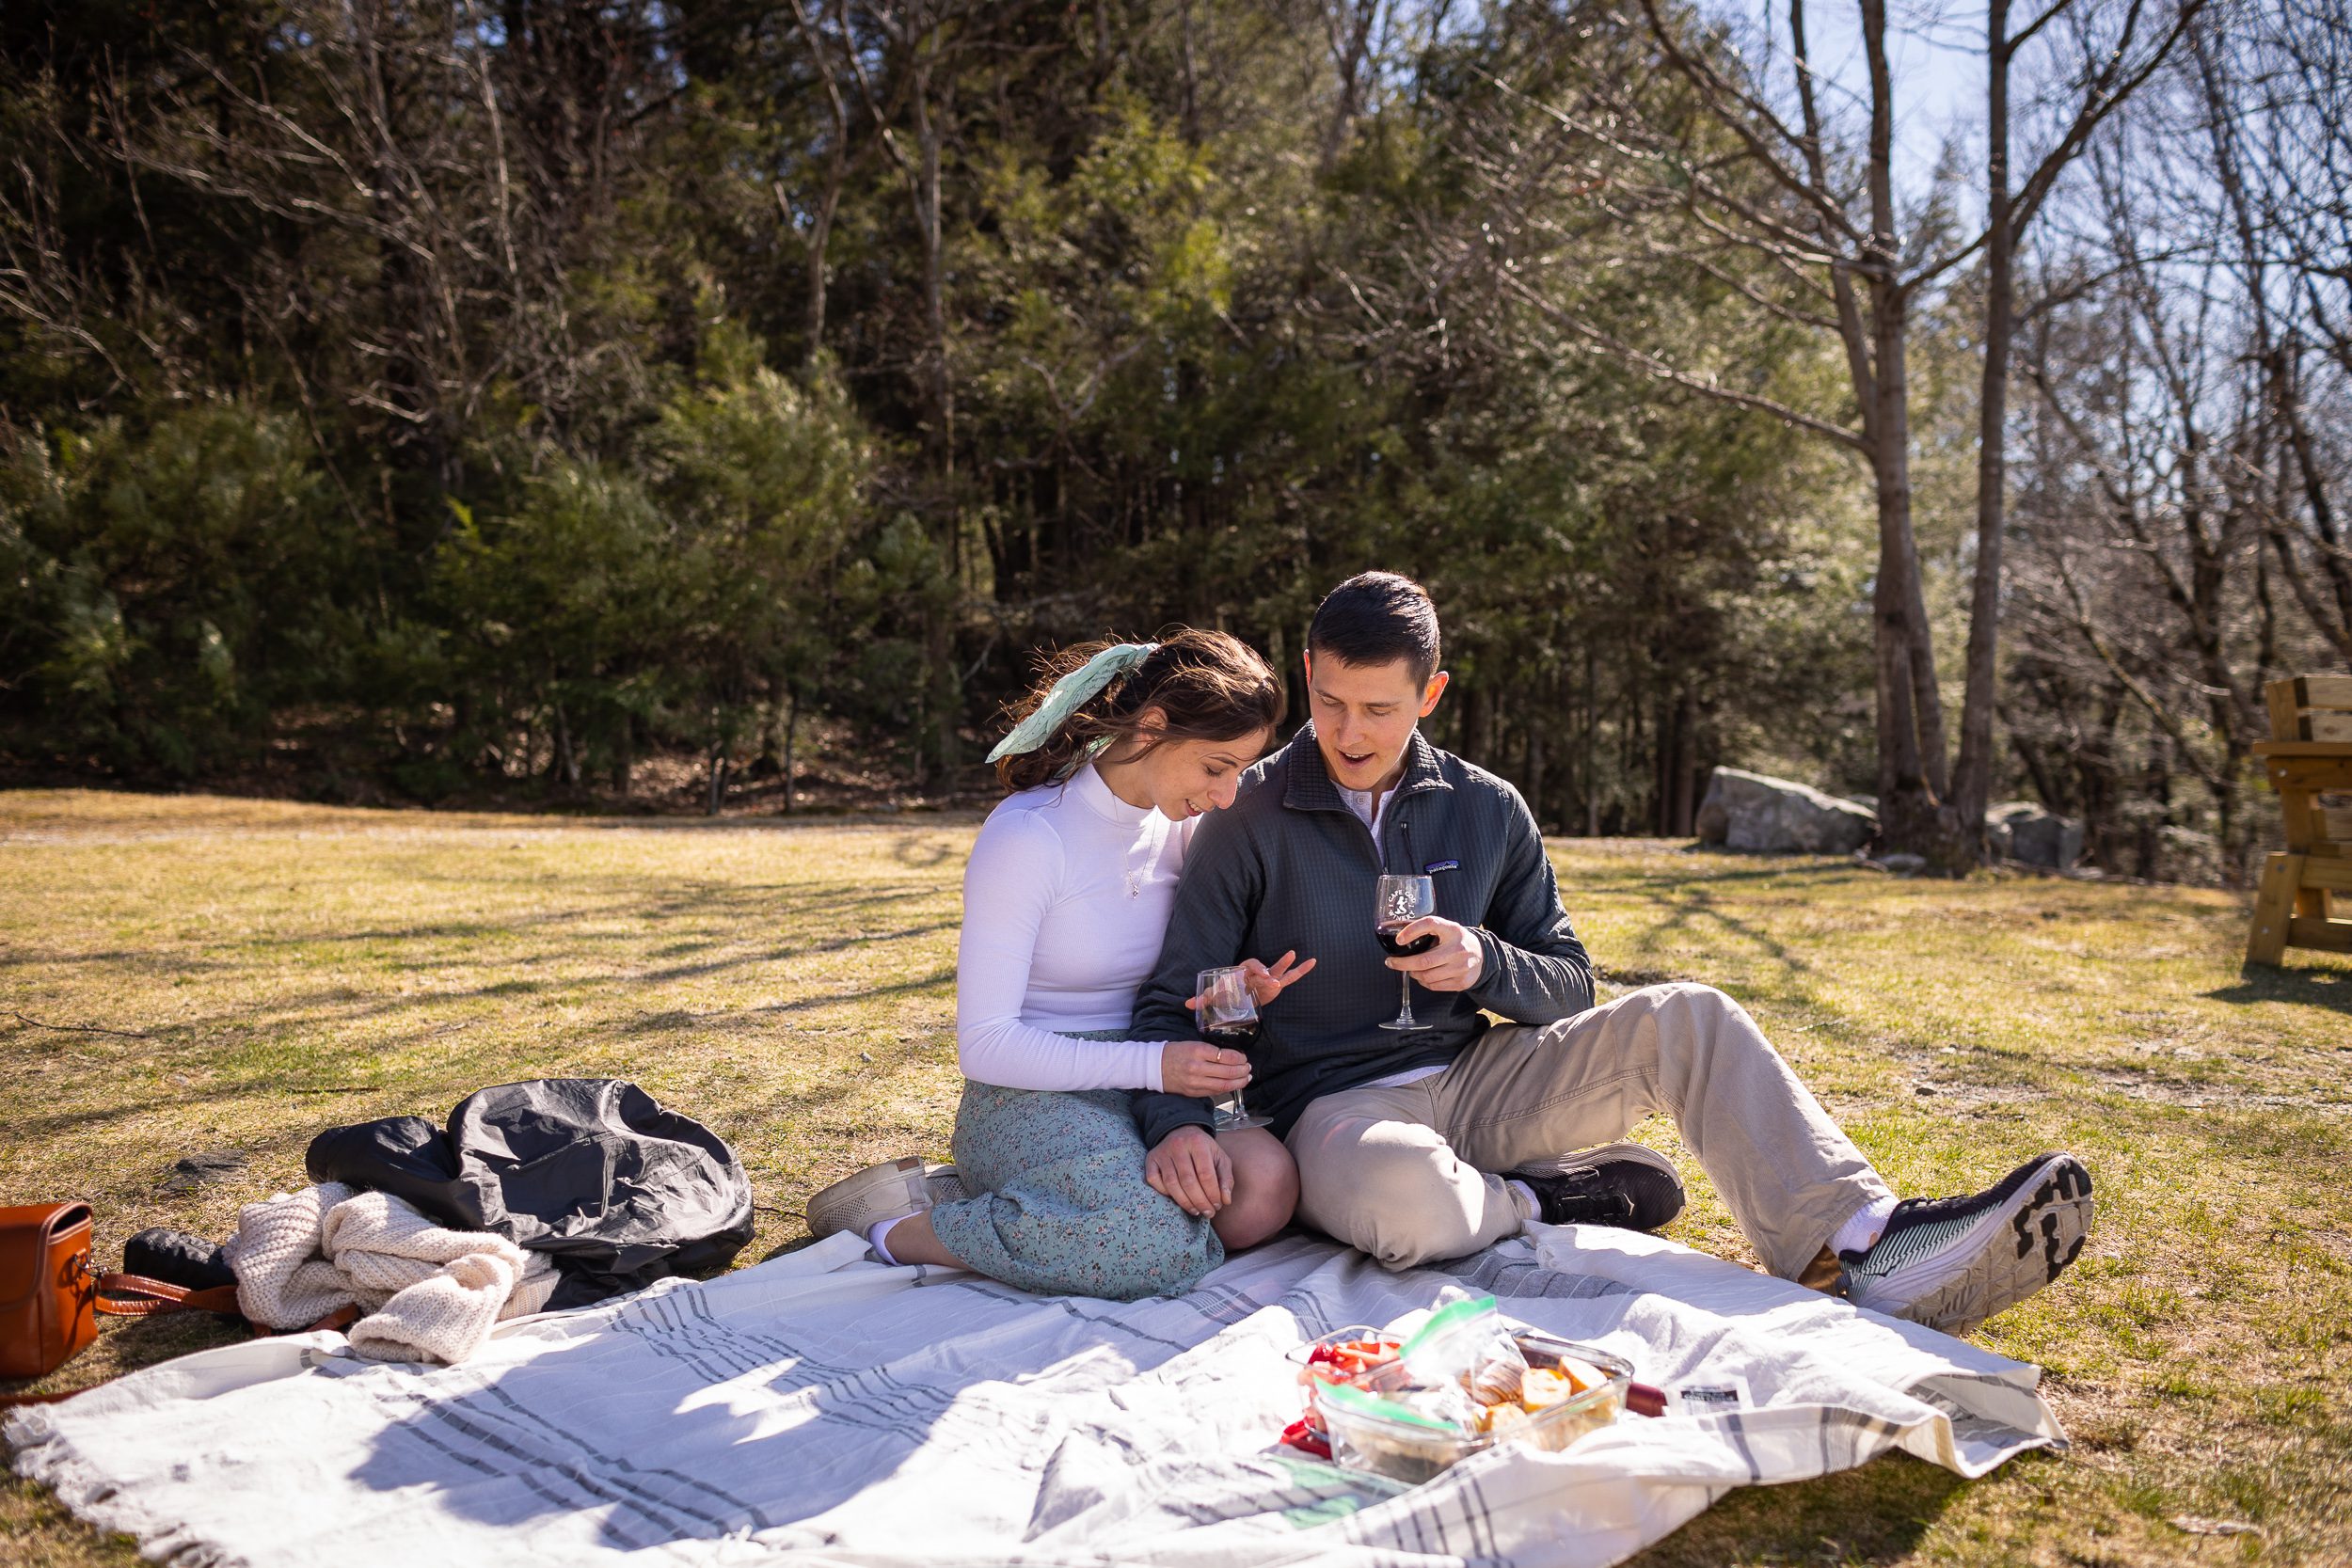 Picnic-date-adventure-photography-session-1